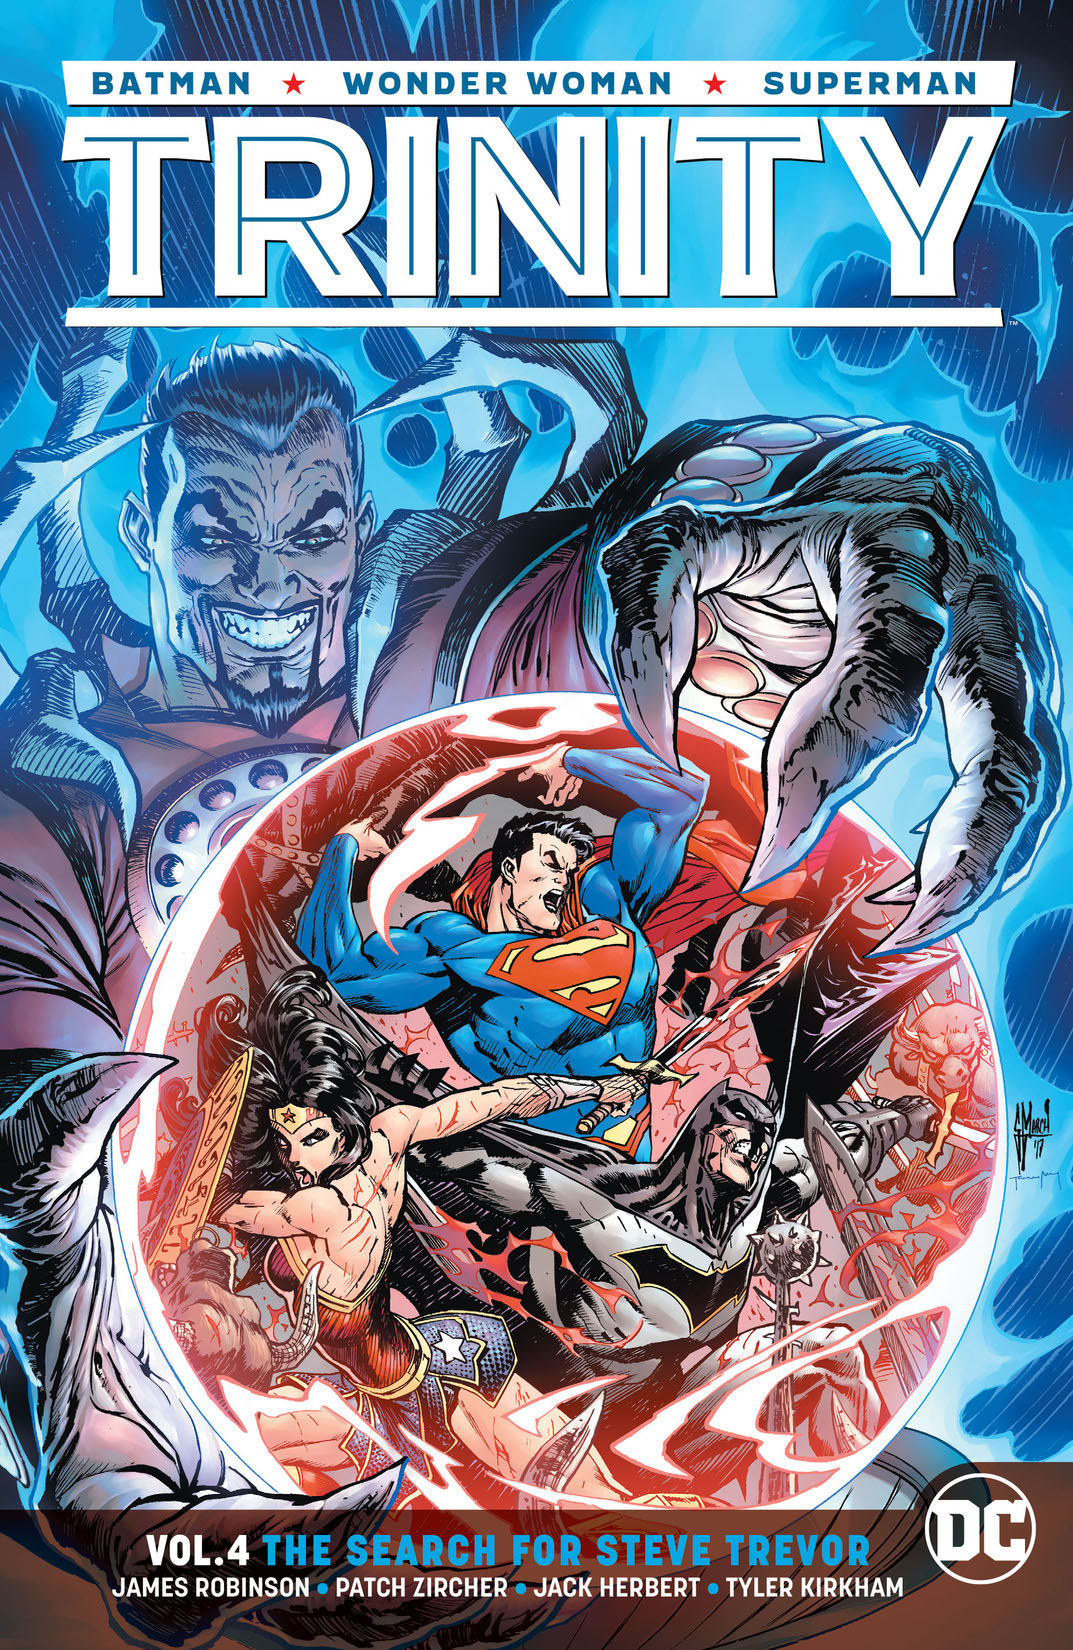 Trinity Vol. 4: The Search for Steve Trevor preview images